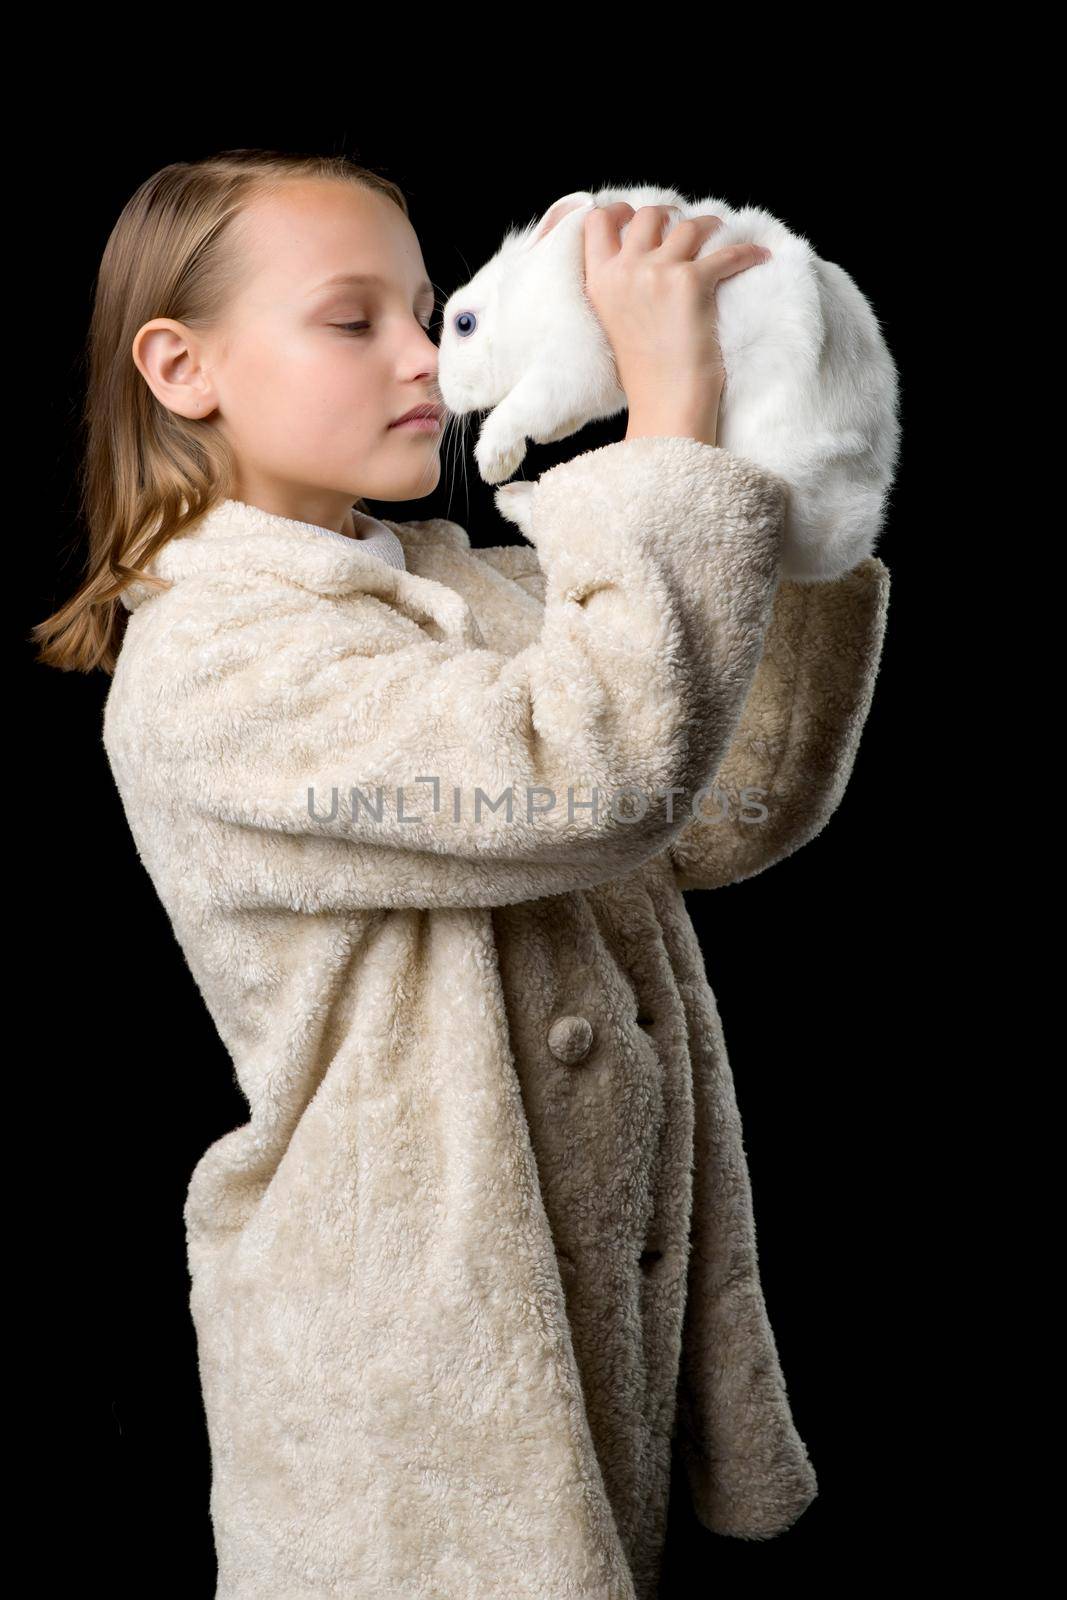 Pretty stylish girl with white rabbit. Side shot of beautiful girl in beige fur coat looking at cute bunny pet. Portrait of preteen child posing in studio against black background